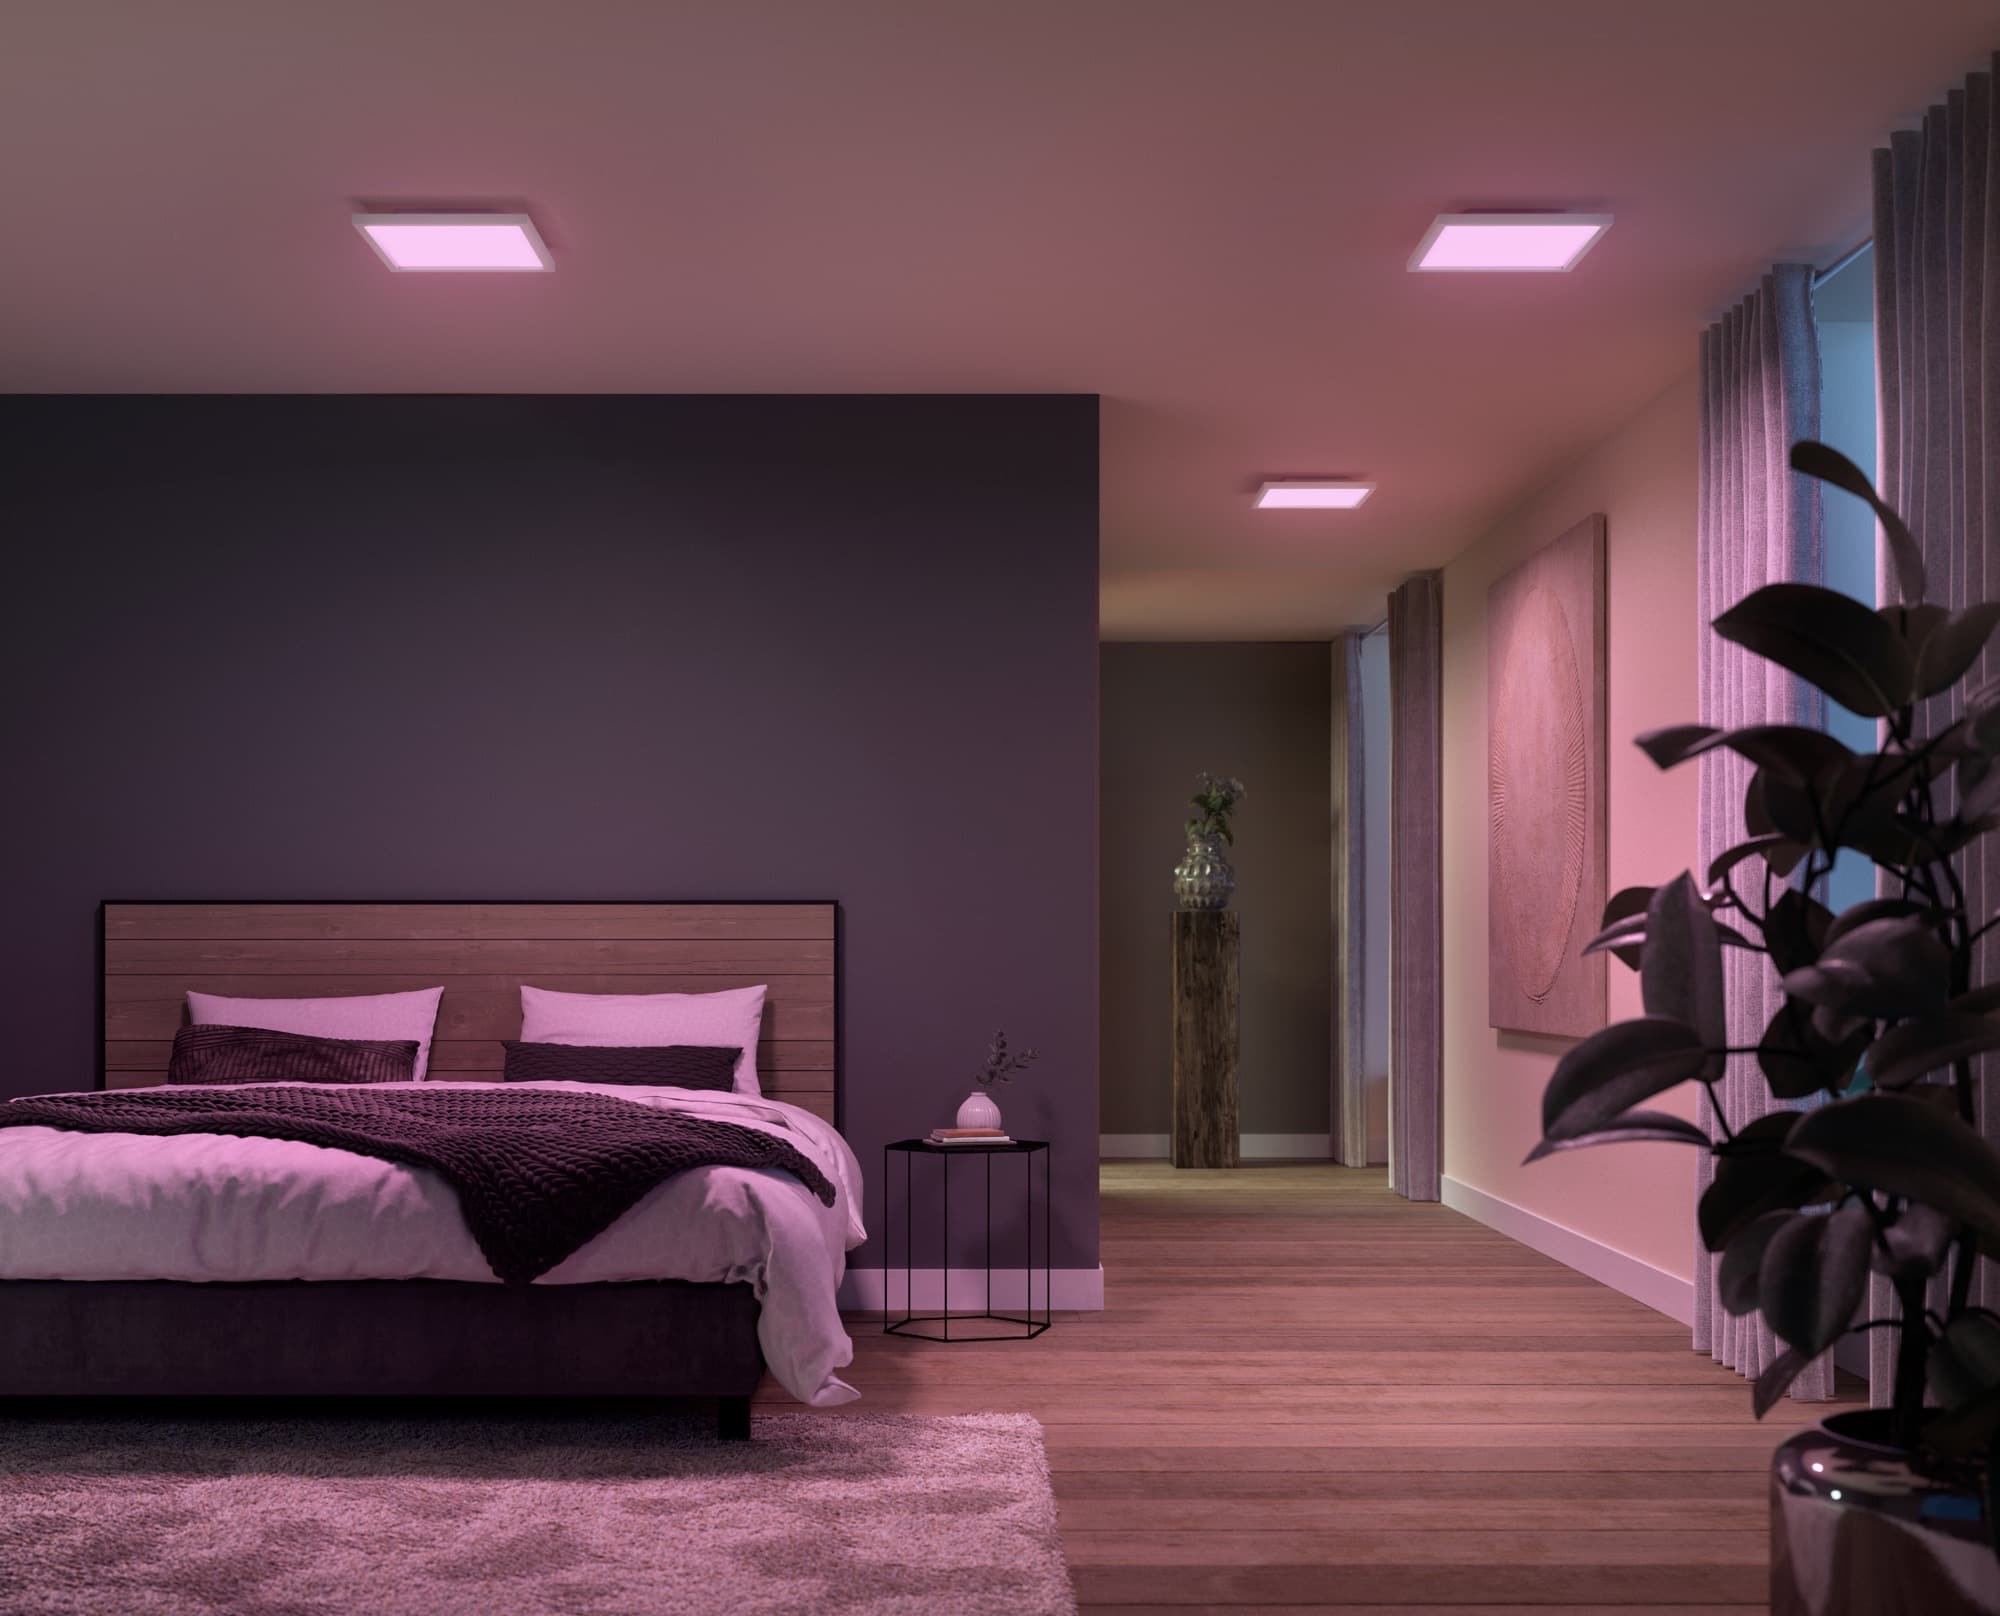 Hueblog: Philips Hue Surimu: Trying out the small ceiling light